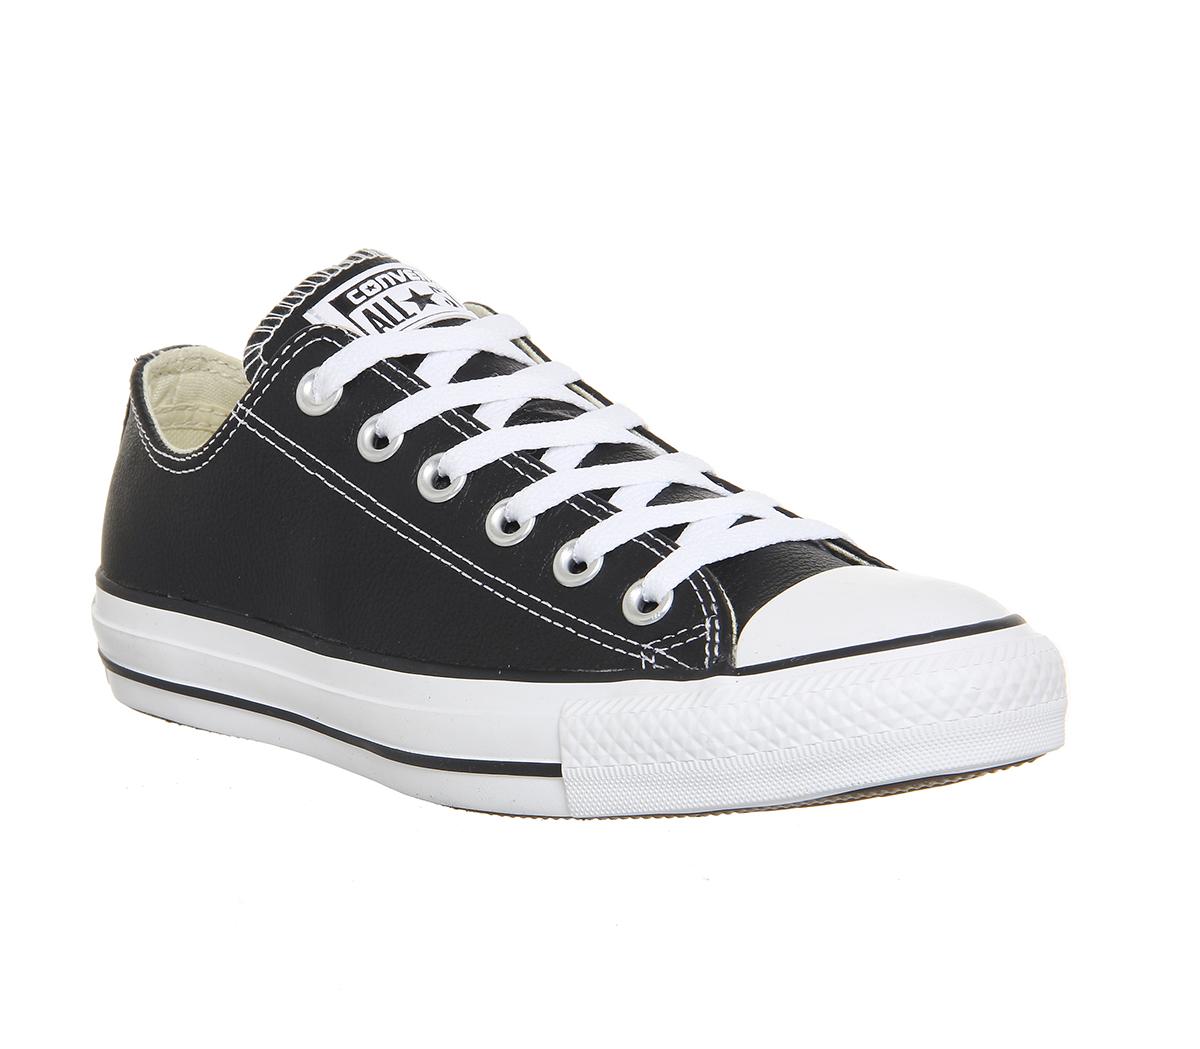 Converse All Star Low Leather Black White Leather - Unisex Sports